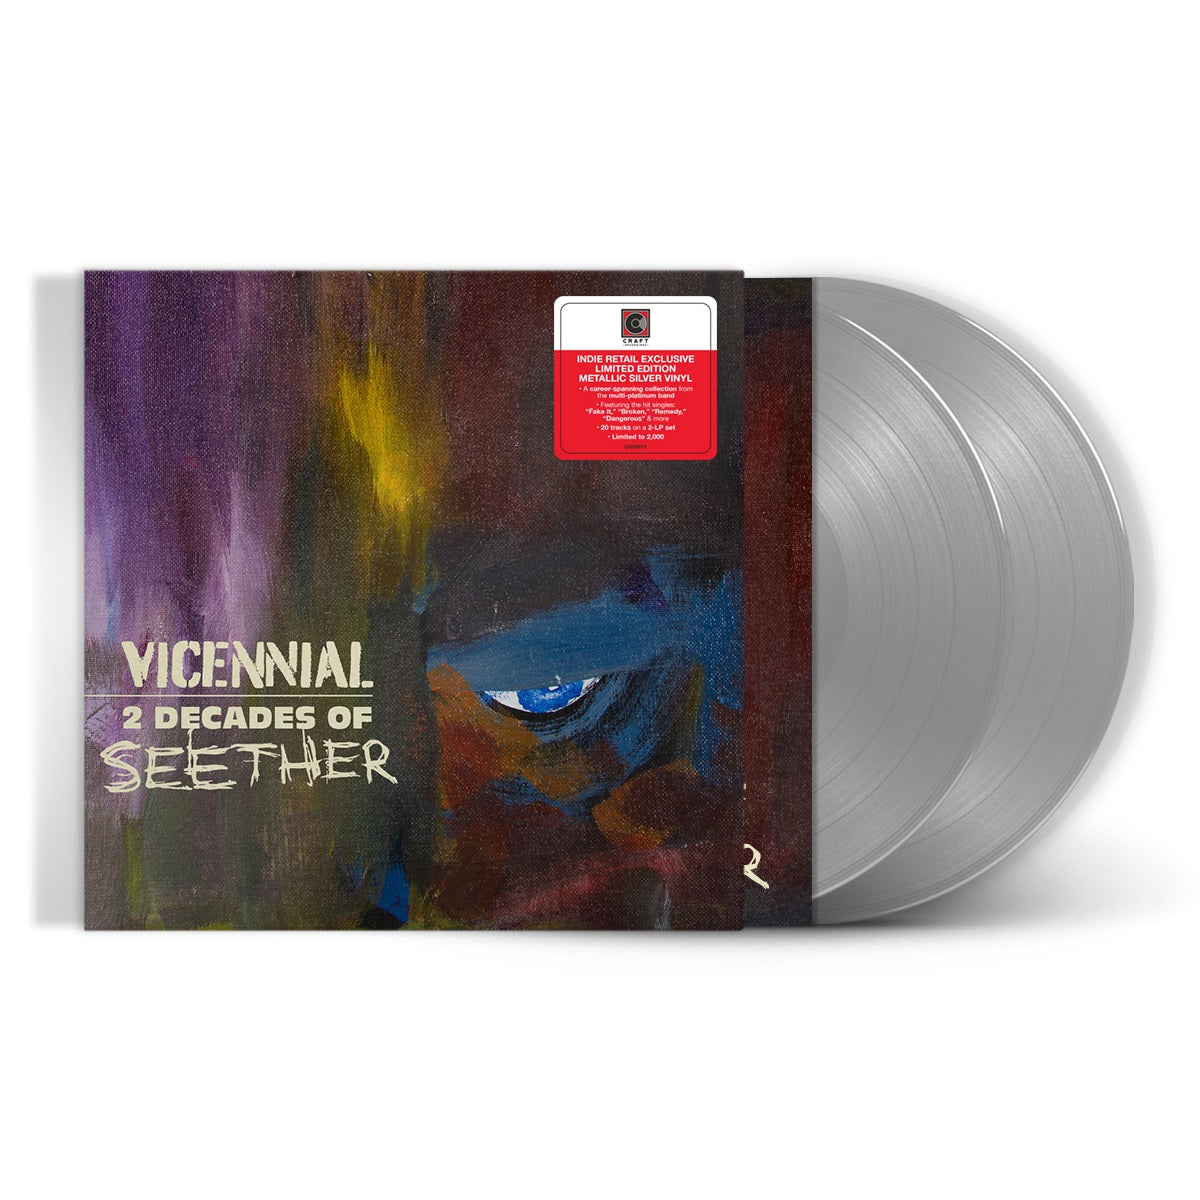 Seether | Vicennial - 2 Decades Of Seether (Limited Edition, Gatefold LP Jacket, Colored Vinyl, Indie Exclusive, Smoke) (2 Lp's) | Vinyl